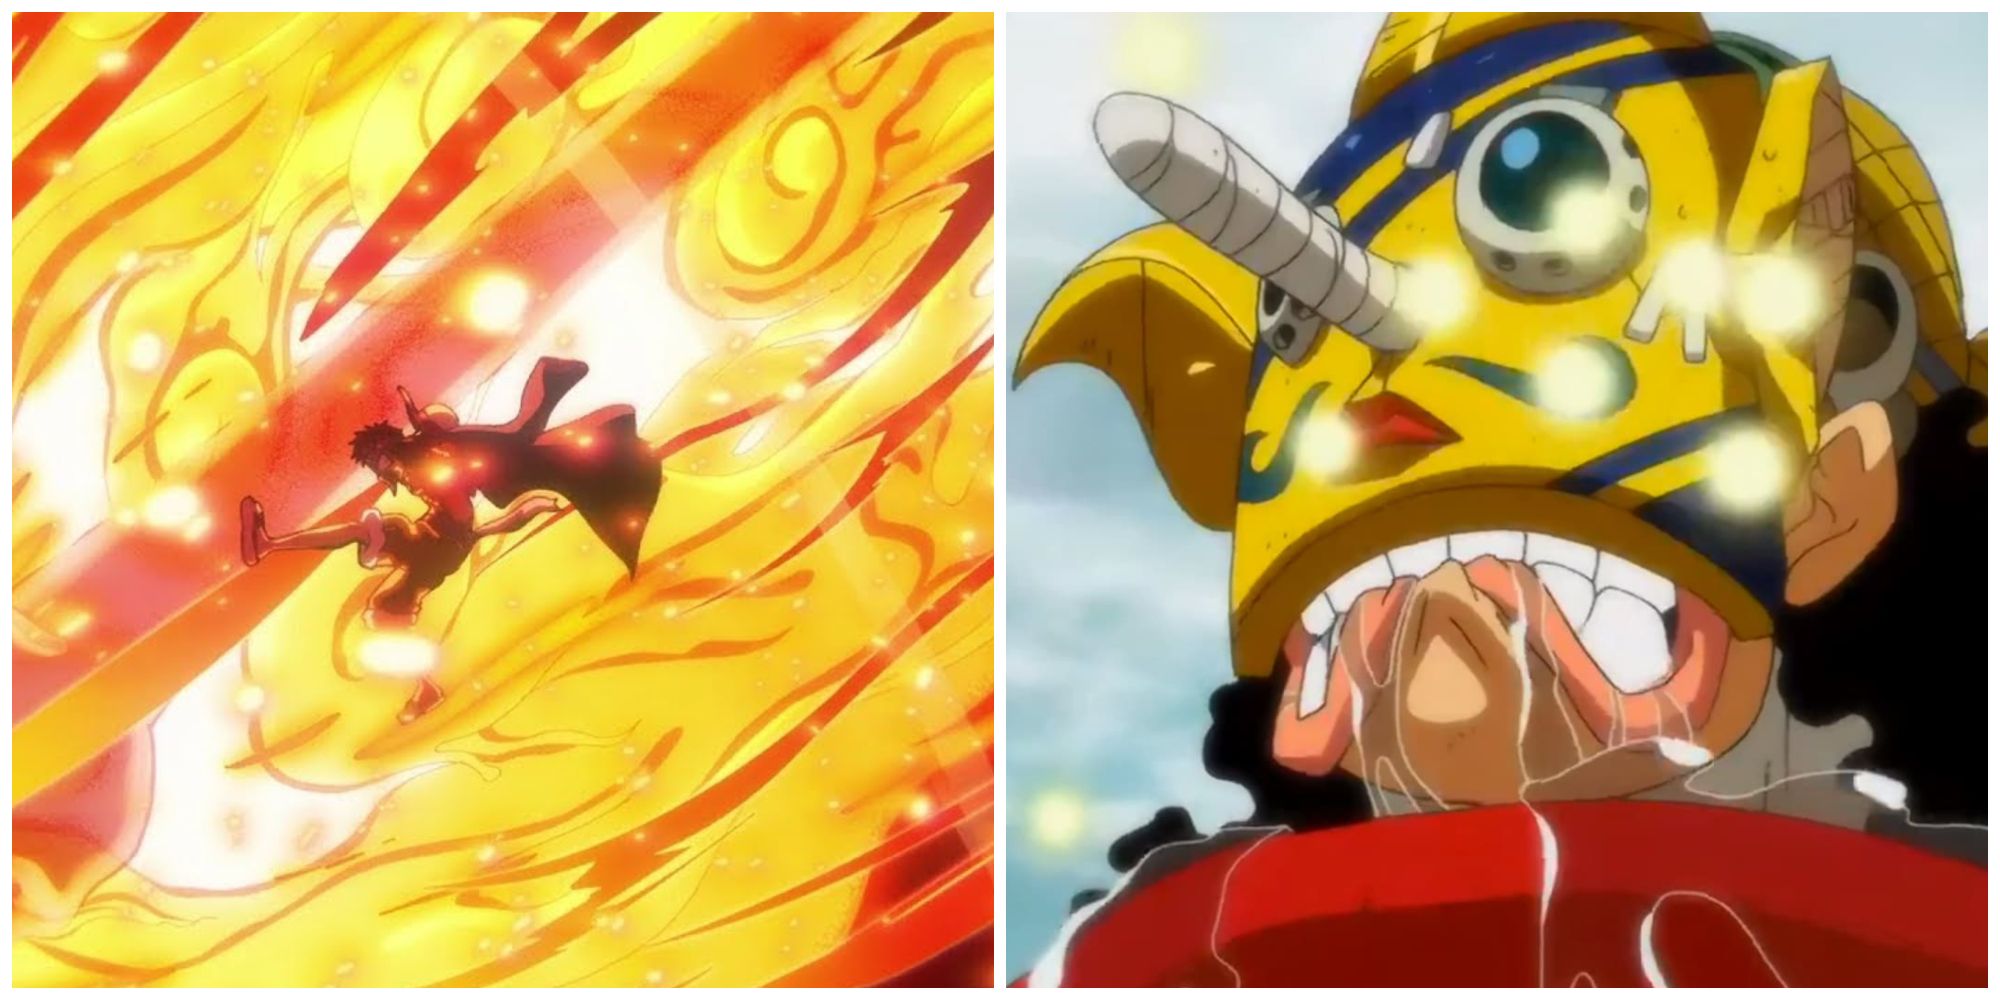 Why 'One Piece' Episode 1015 Might Be One of the Greatest Anime